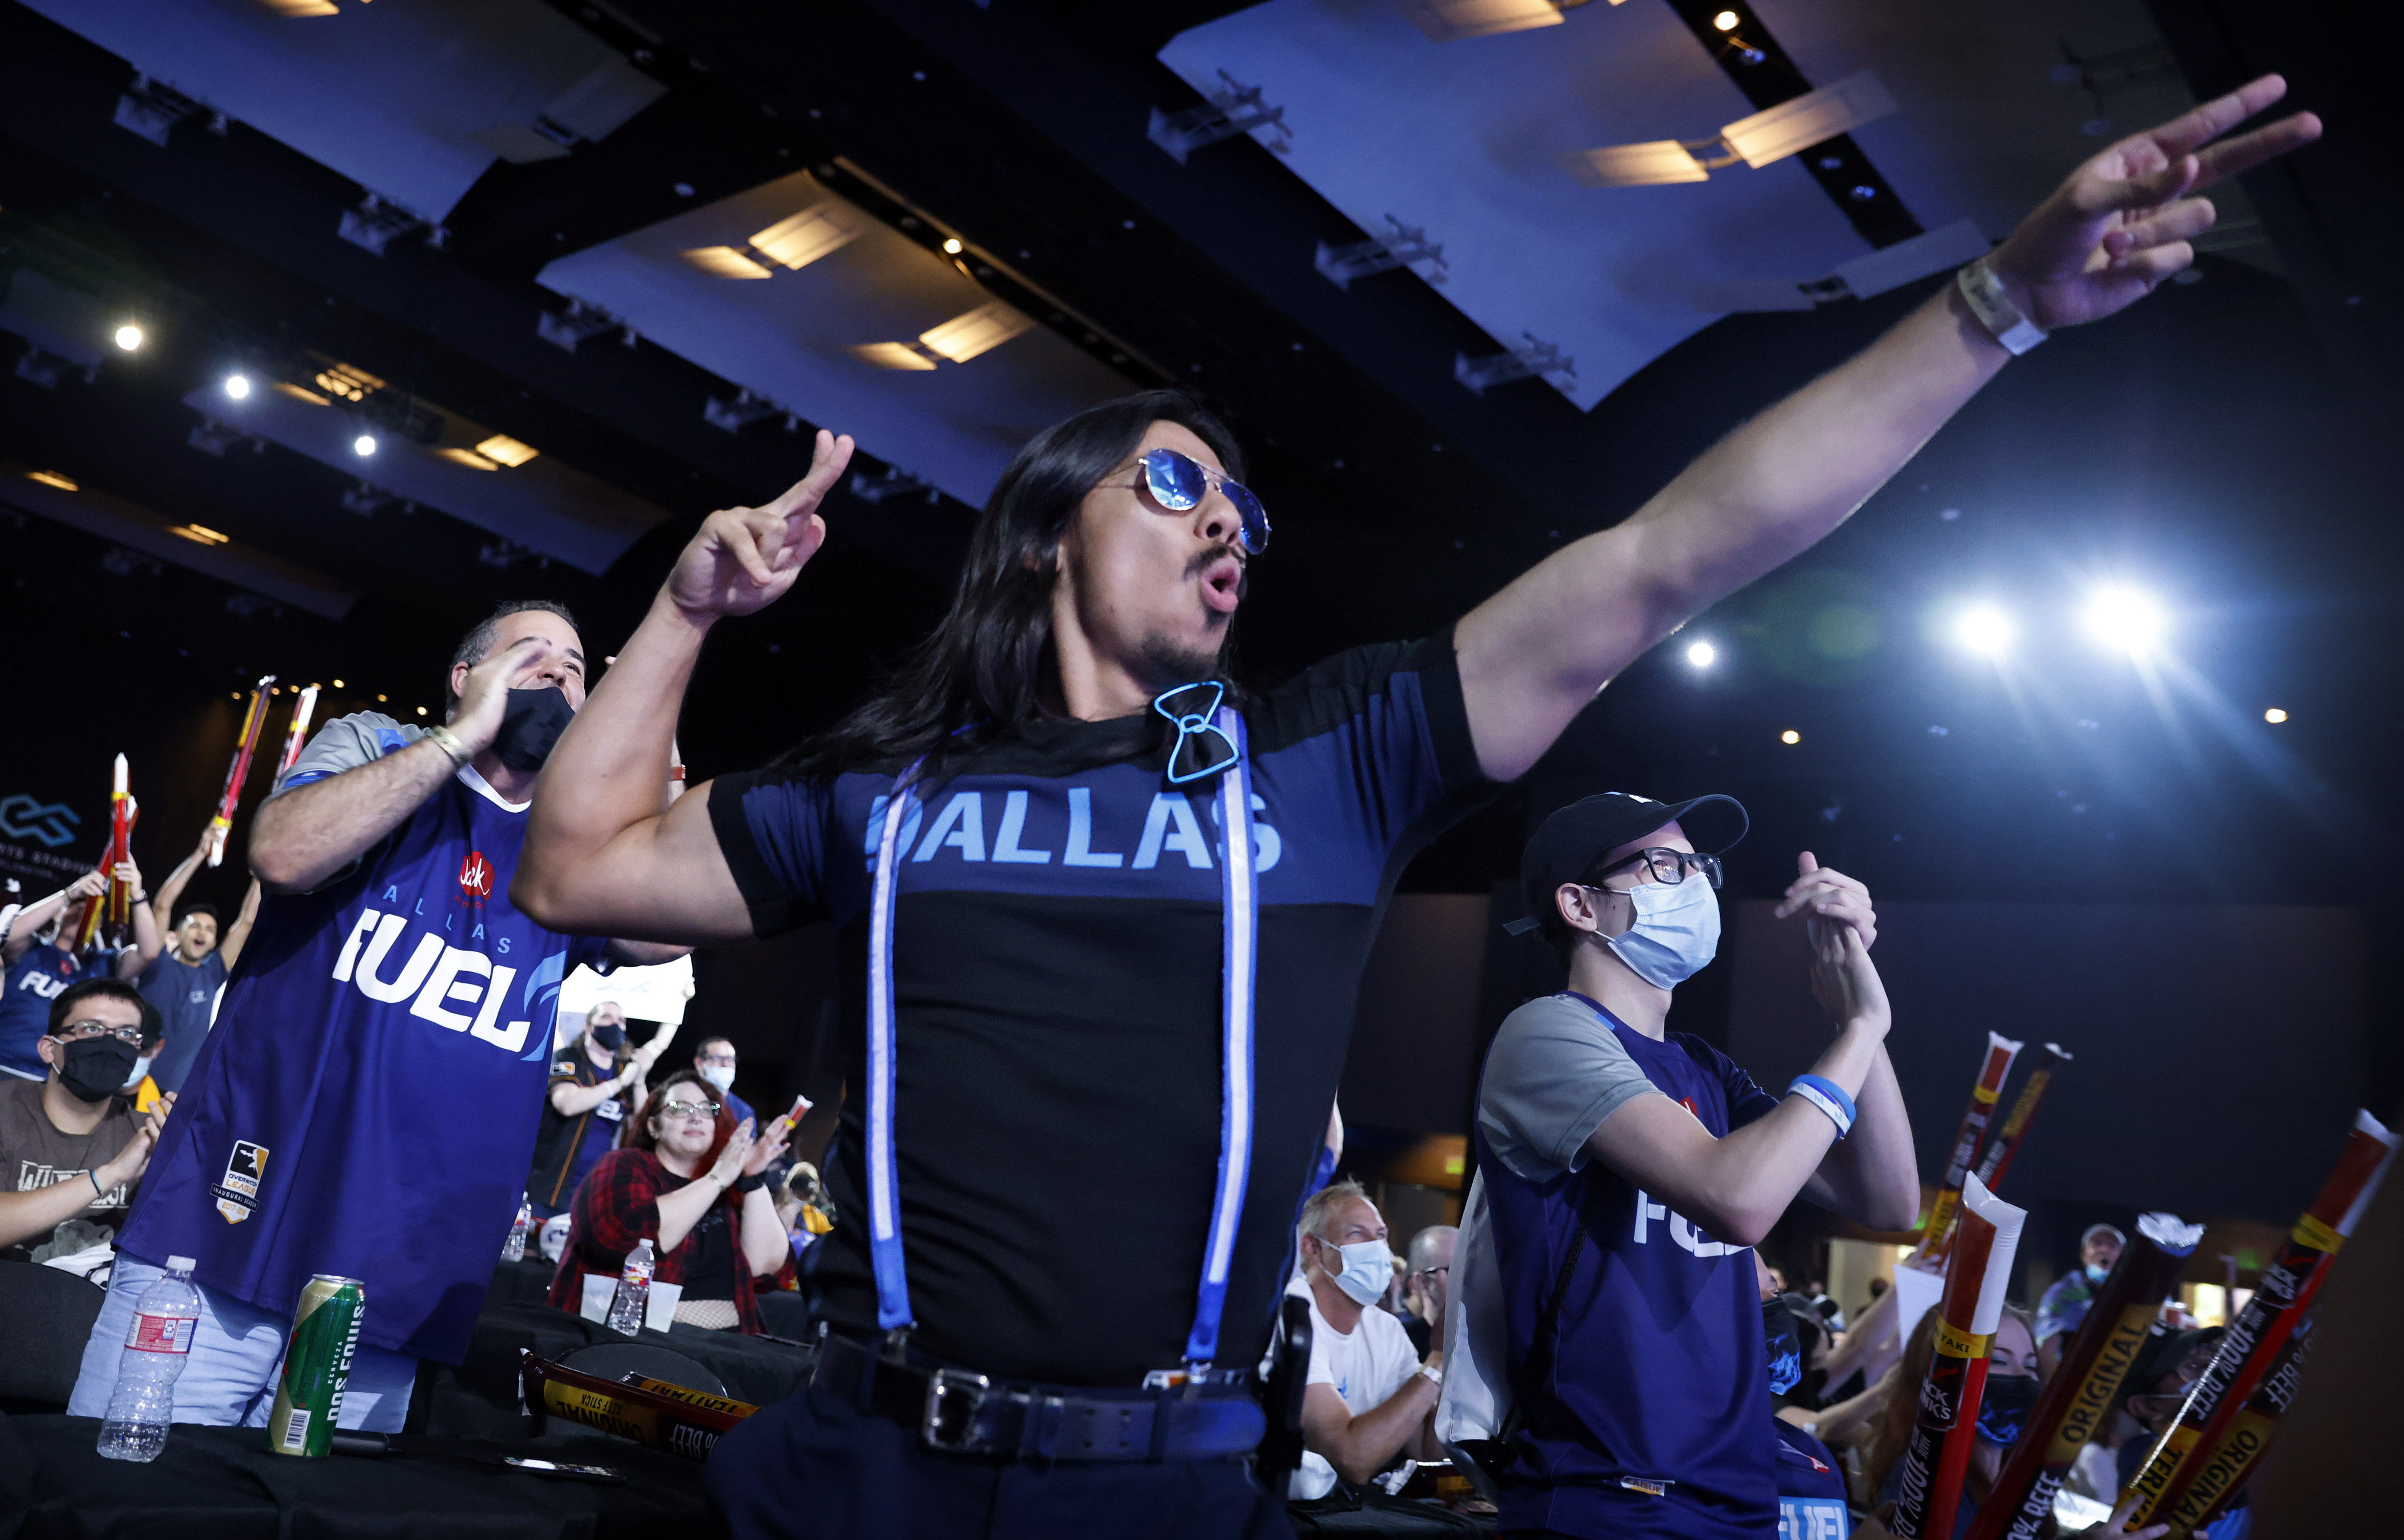 I knew we were going to be amazing Dallas Fuel attract new fans, loyal followers in live return